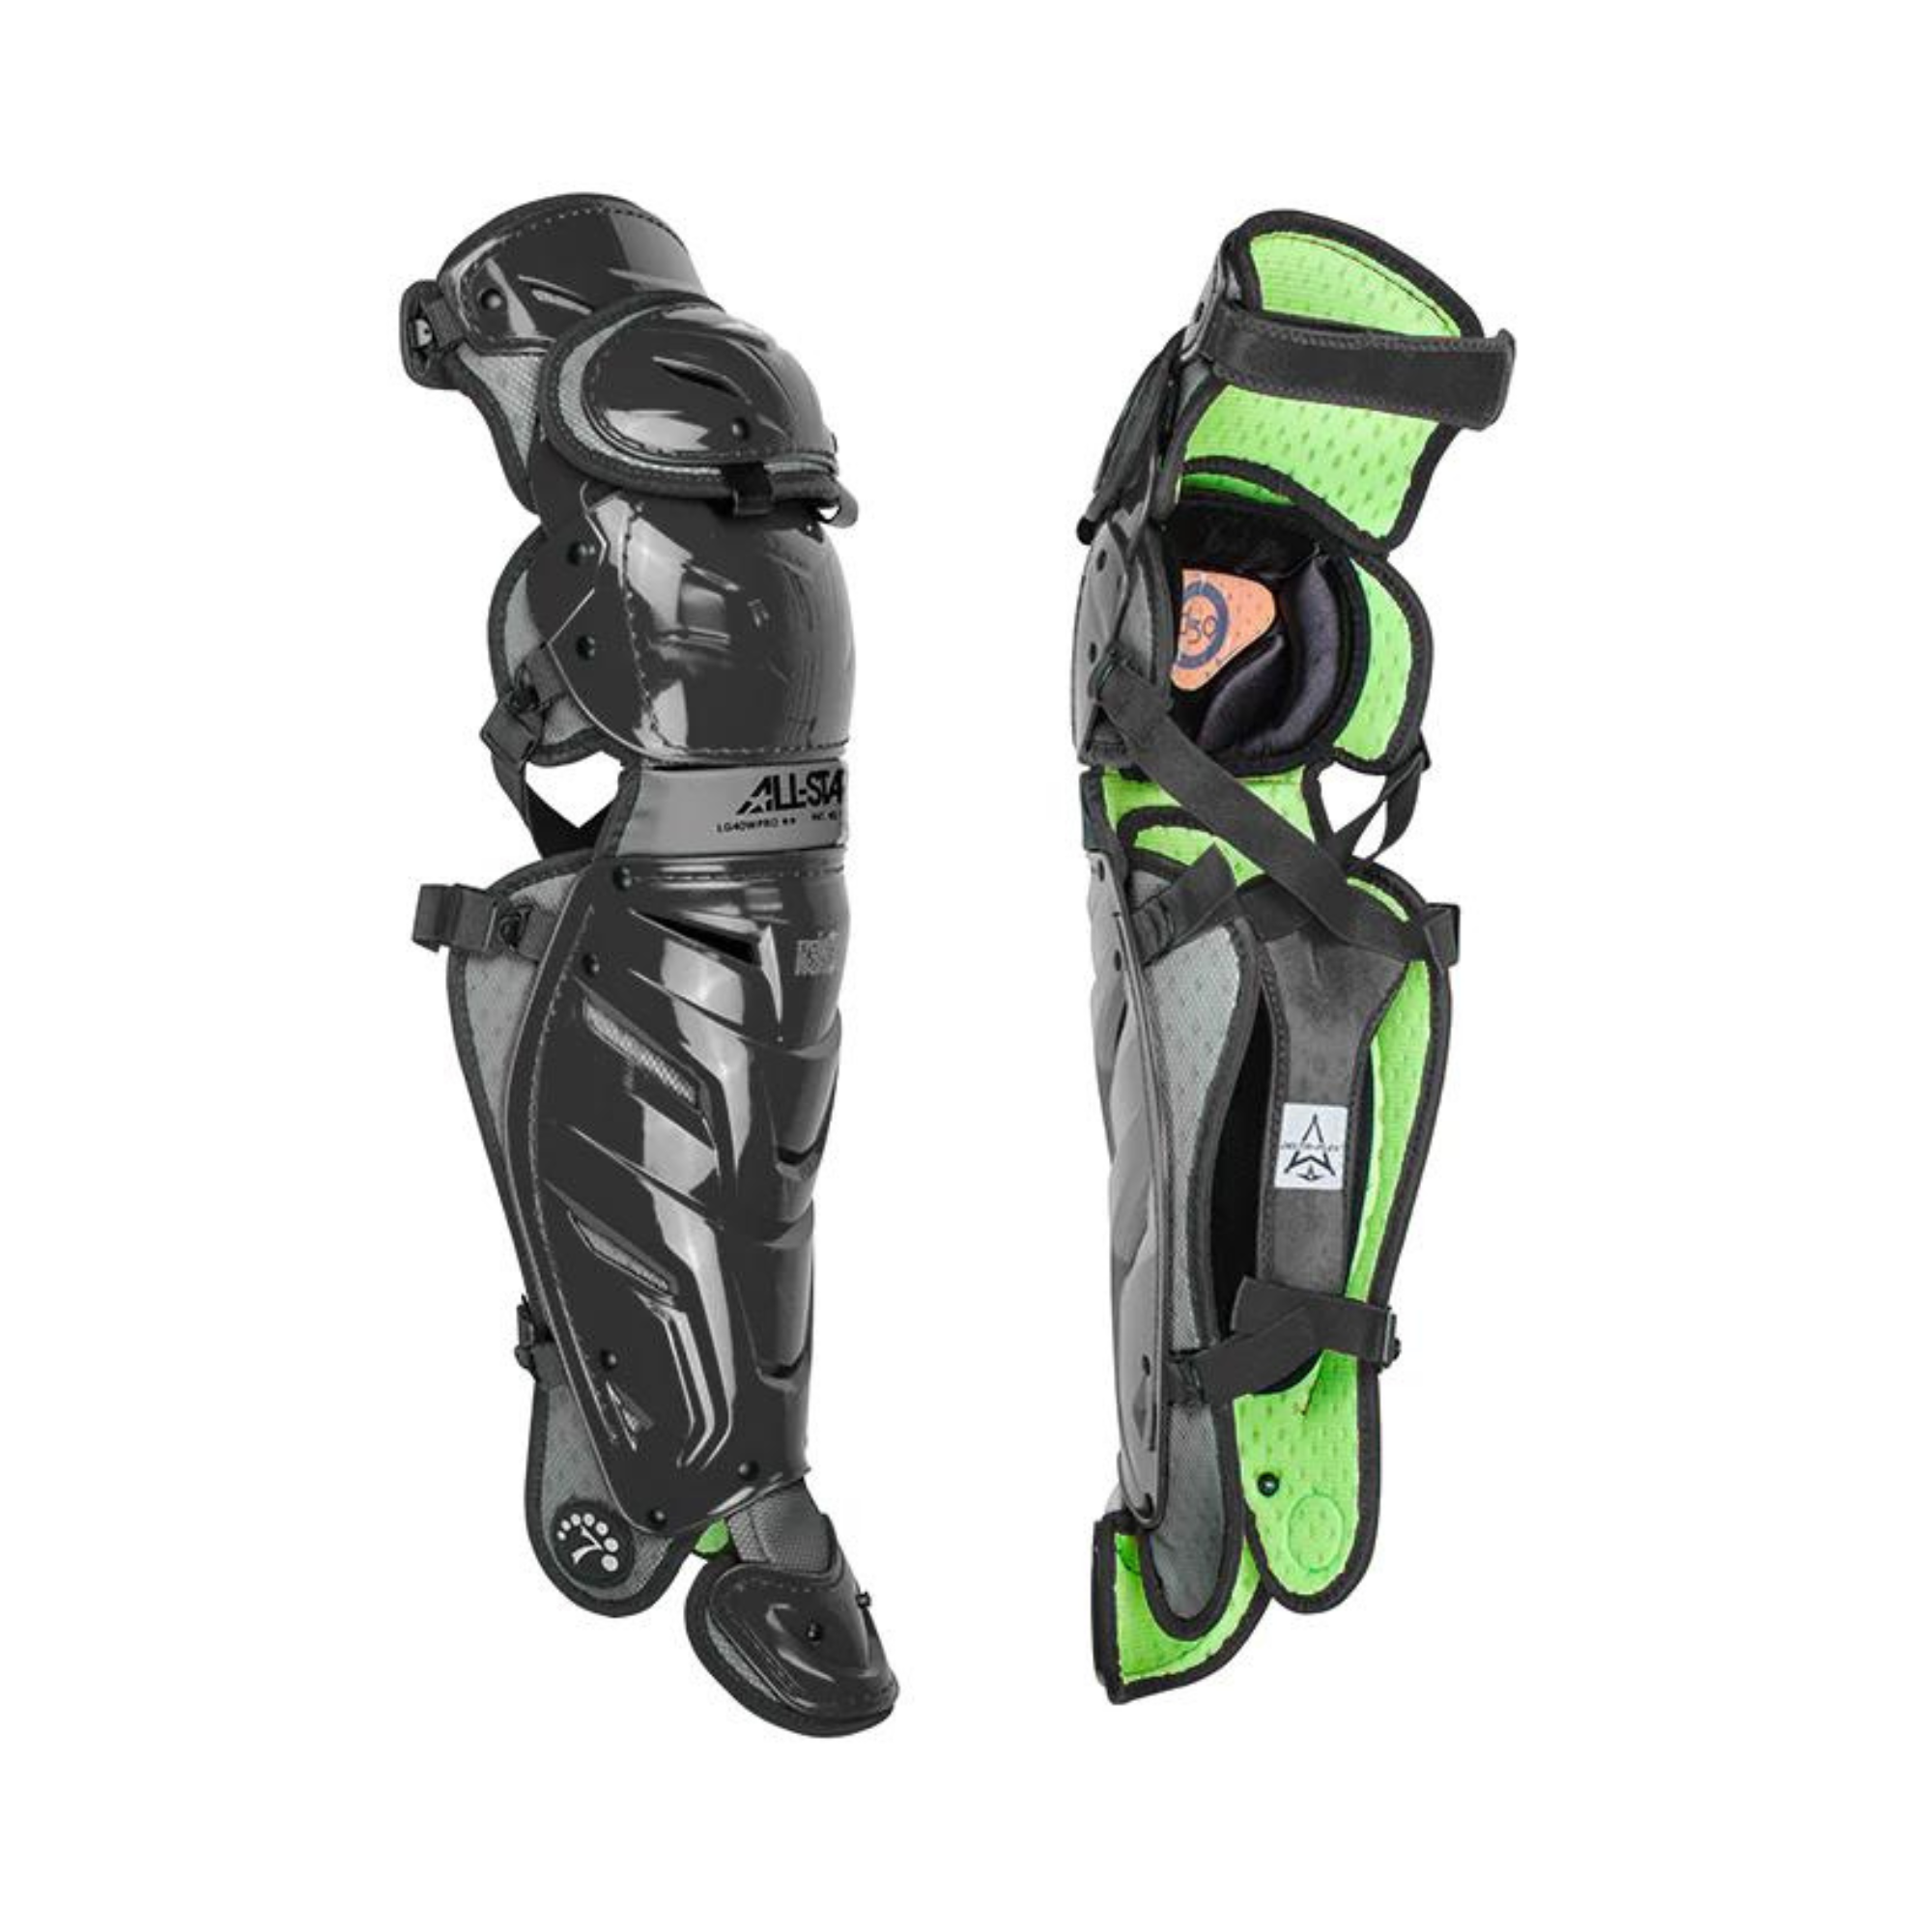 All-Star S7 Axis  Leg Guards Adult 16.5"